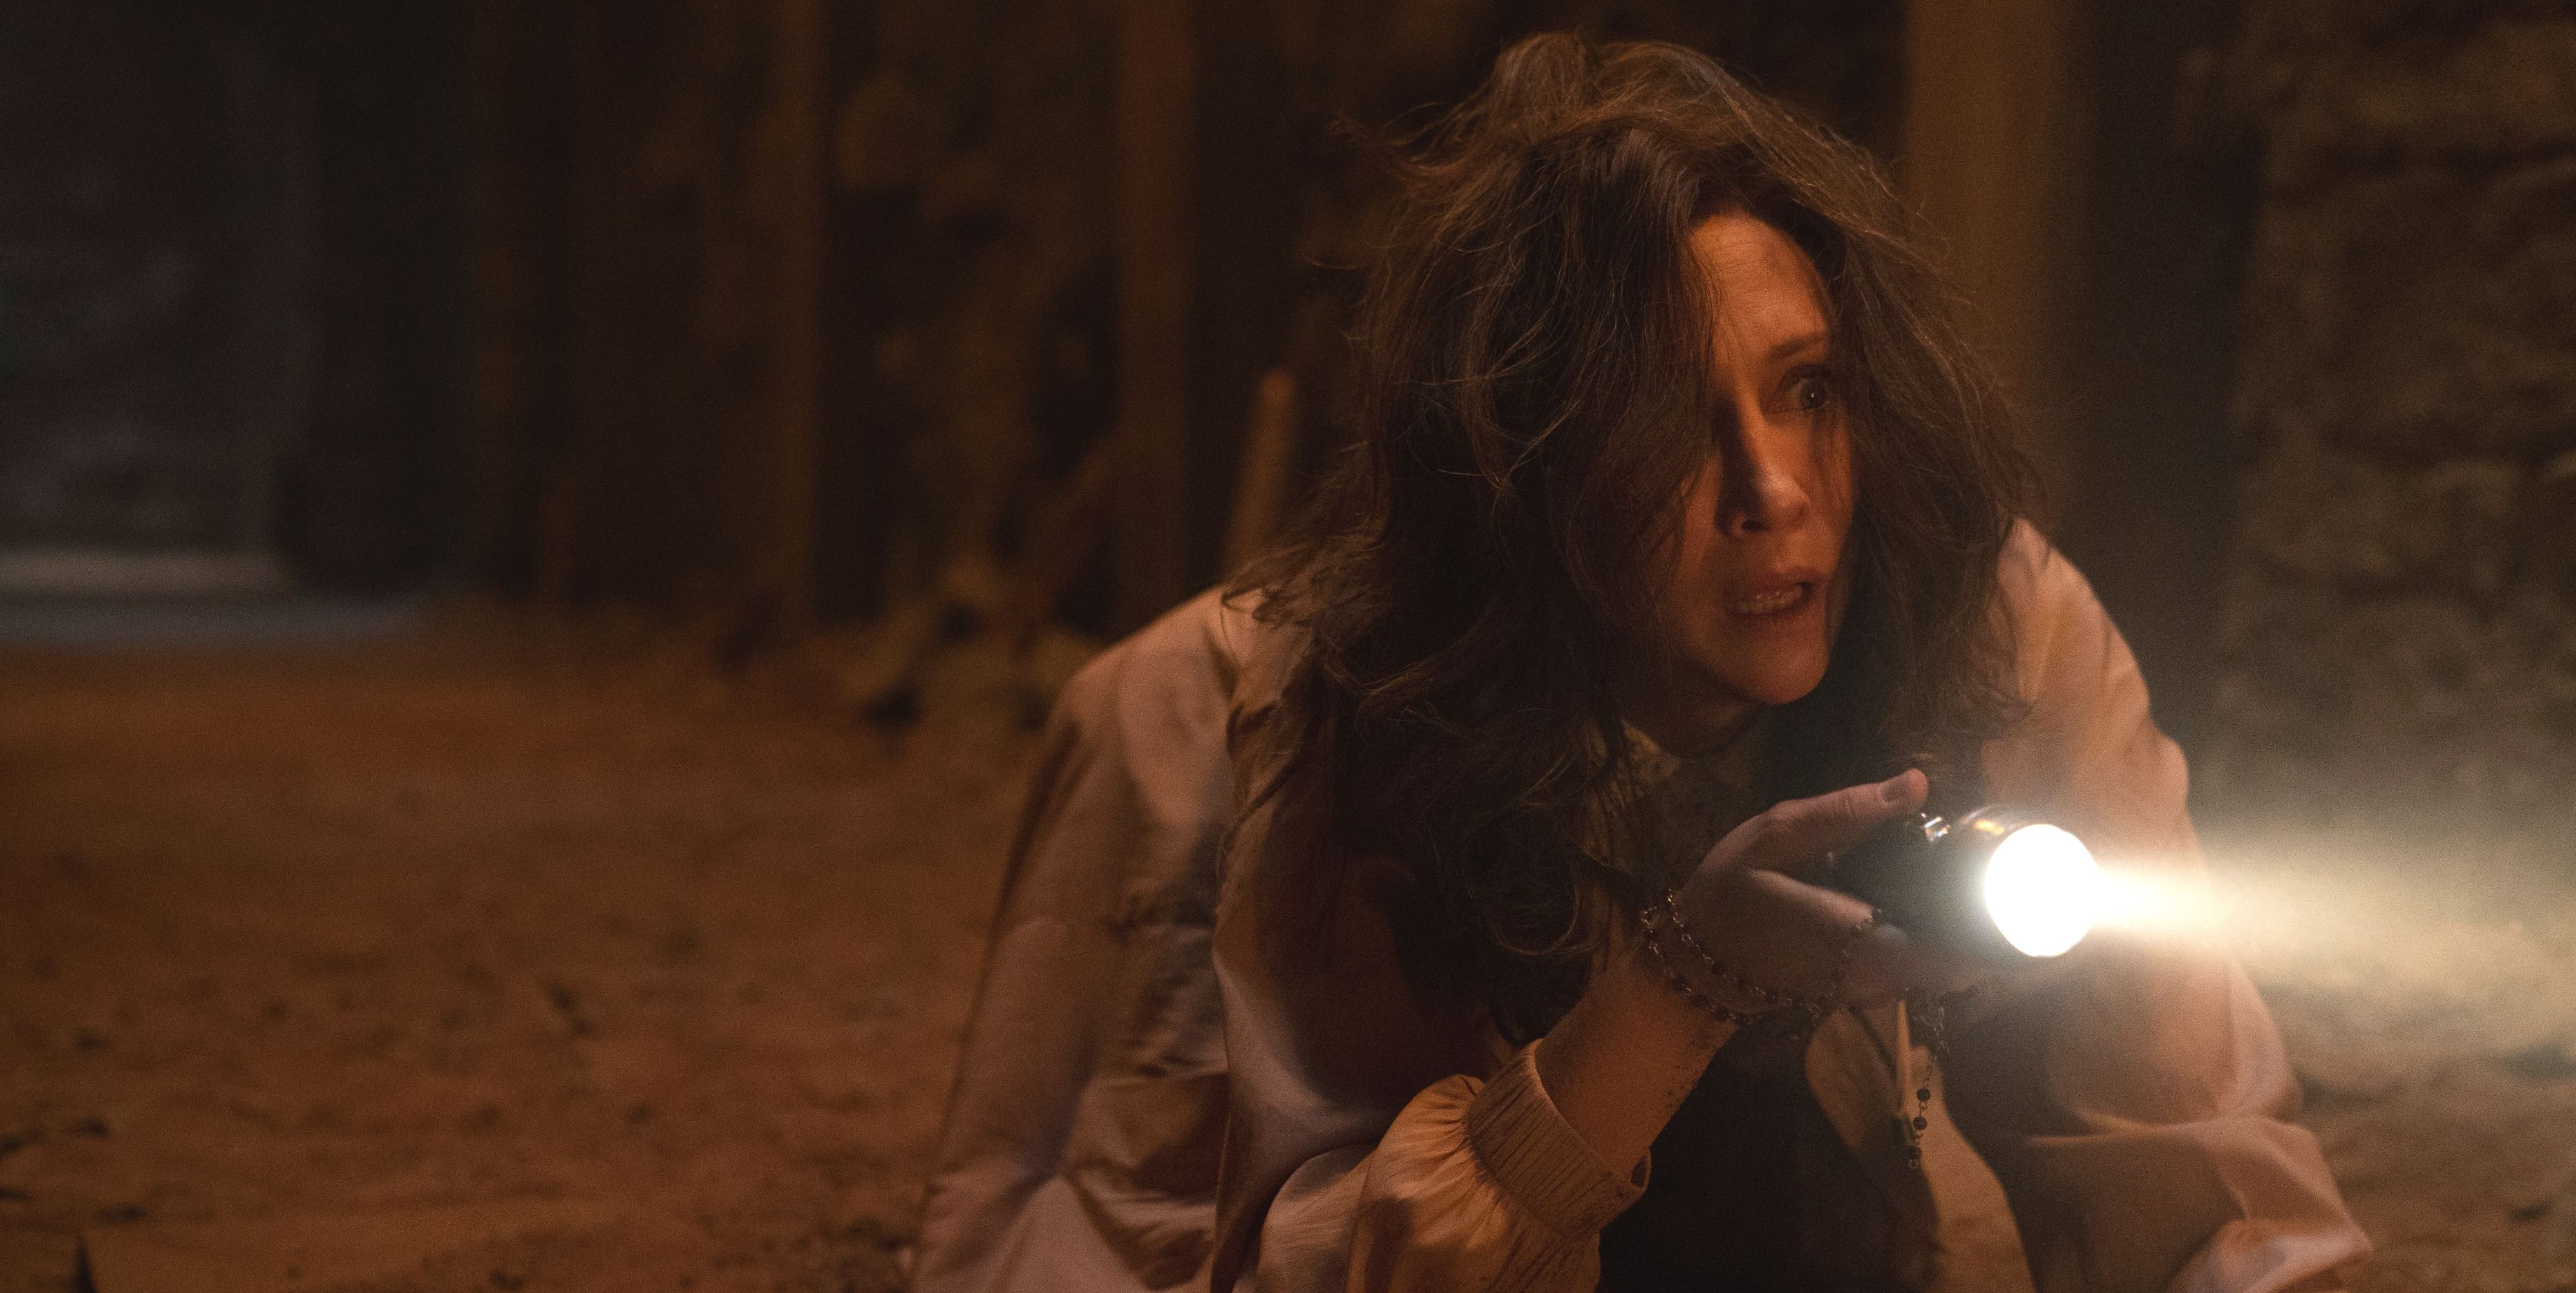 The Conjuring 3, A Quiet Place Part II, Cruella and others top weekend box office